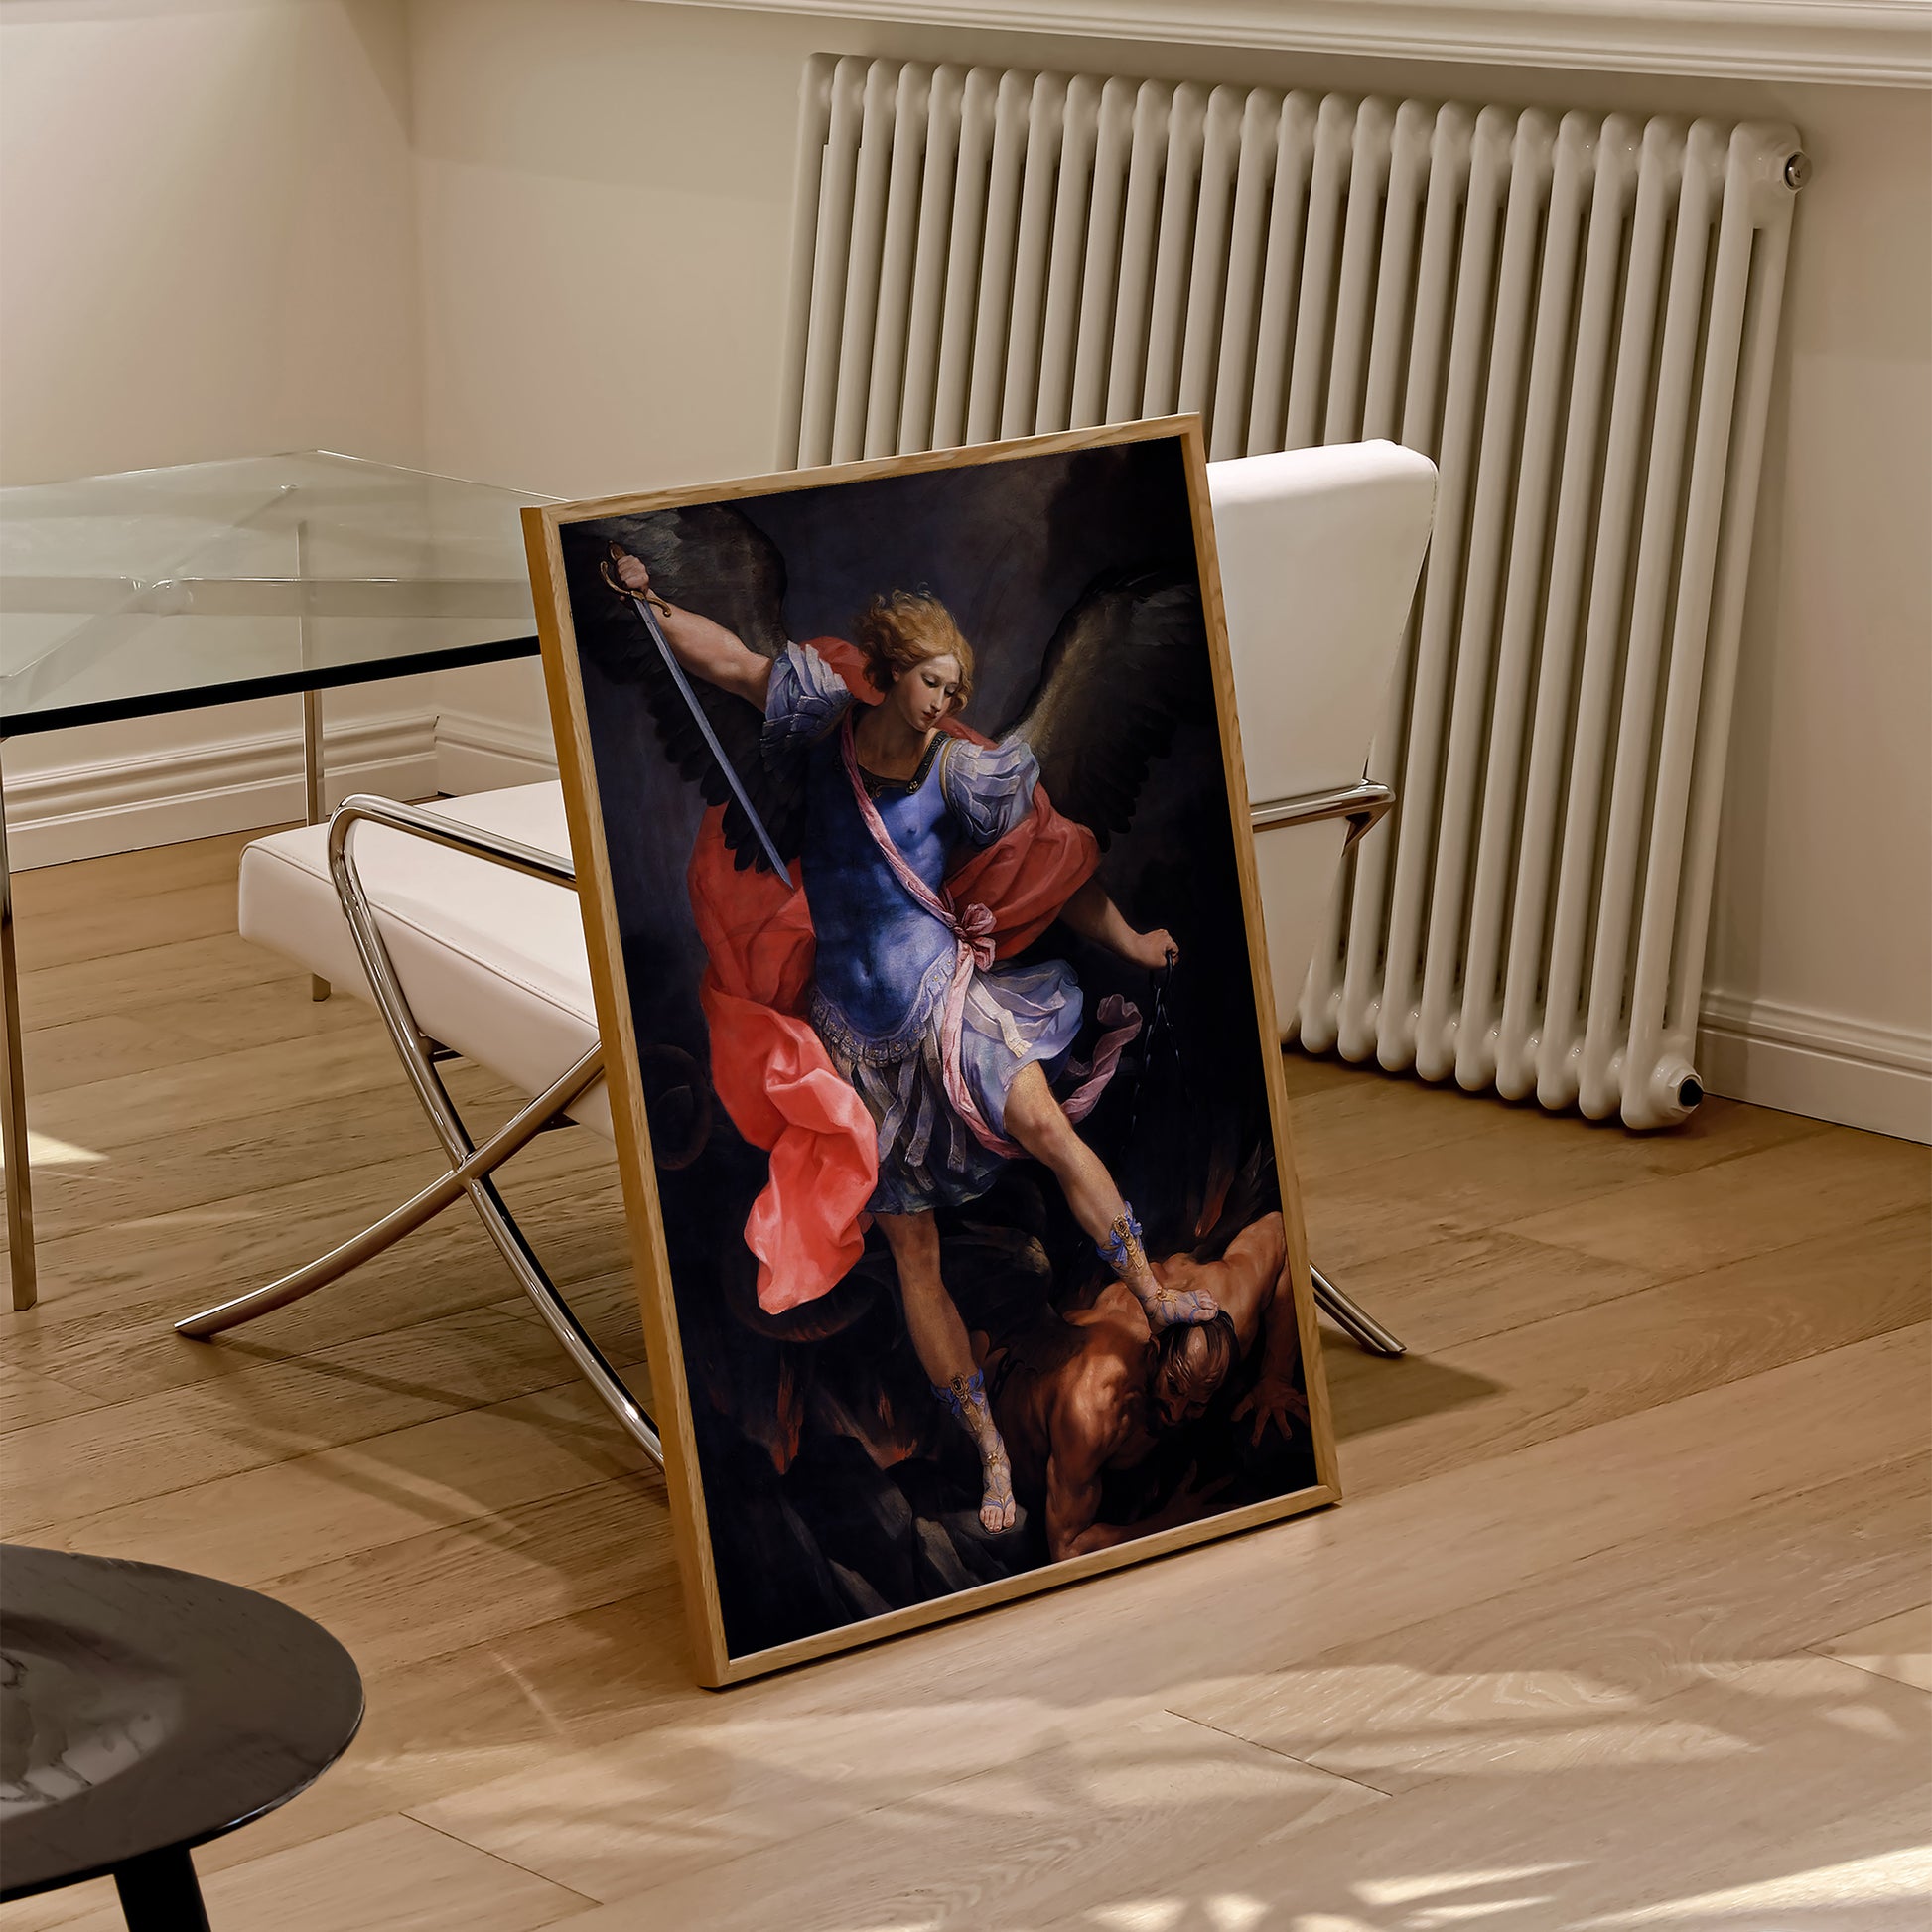 Be inspired by our classic art print Archangel Michael Defeats Satan by Guido Reni. This artwork was printed using the giclée process on archival acid-free paper and is presented in a natural oak frame that captures its timeless beauty in every detail.